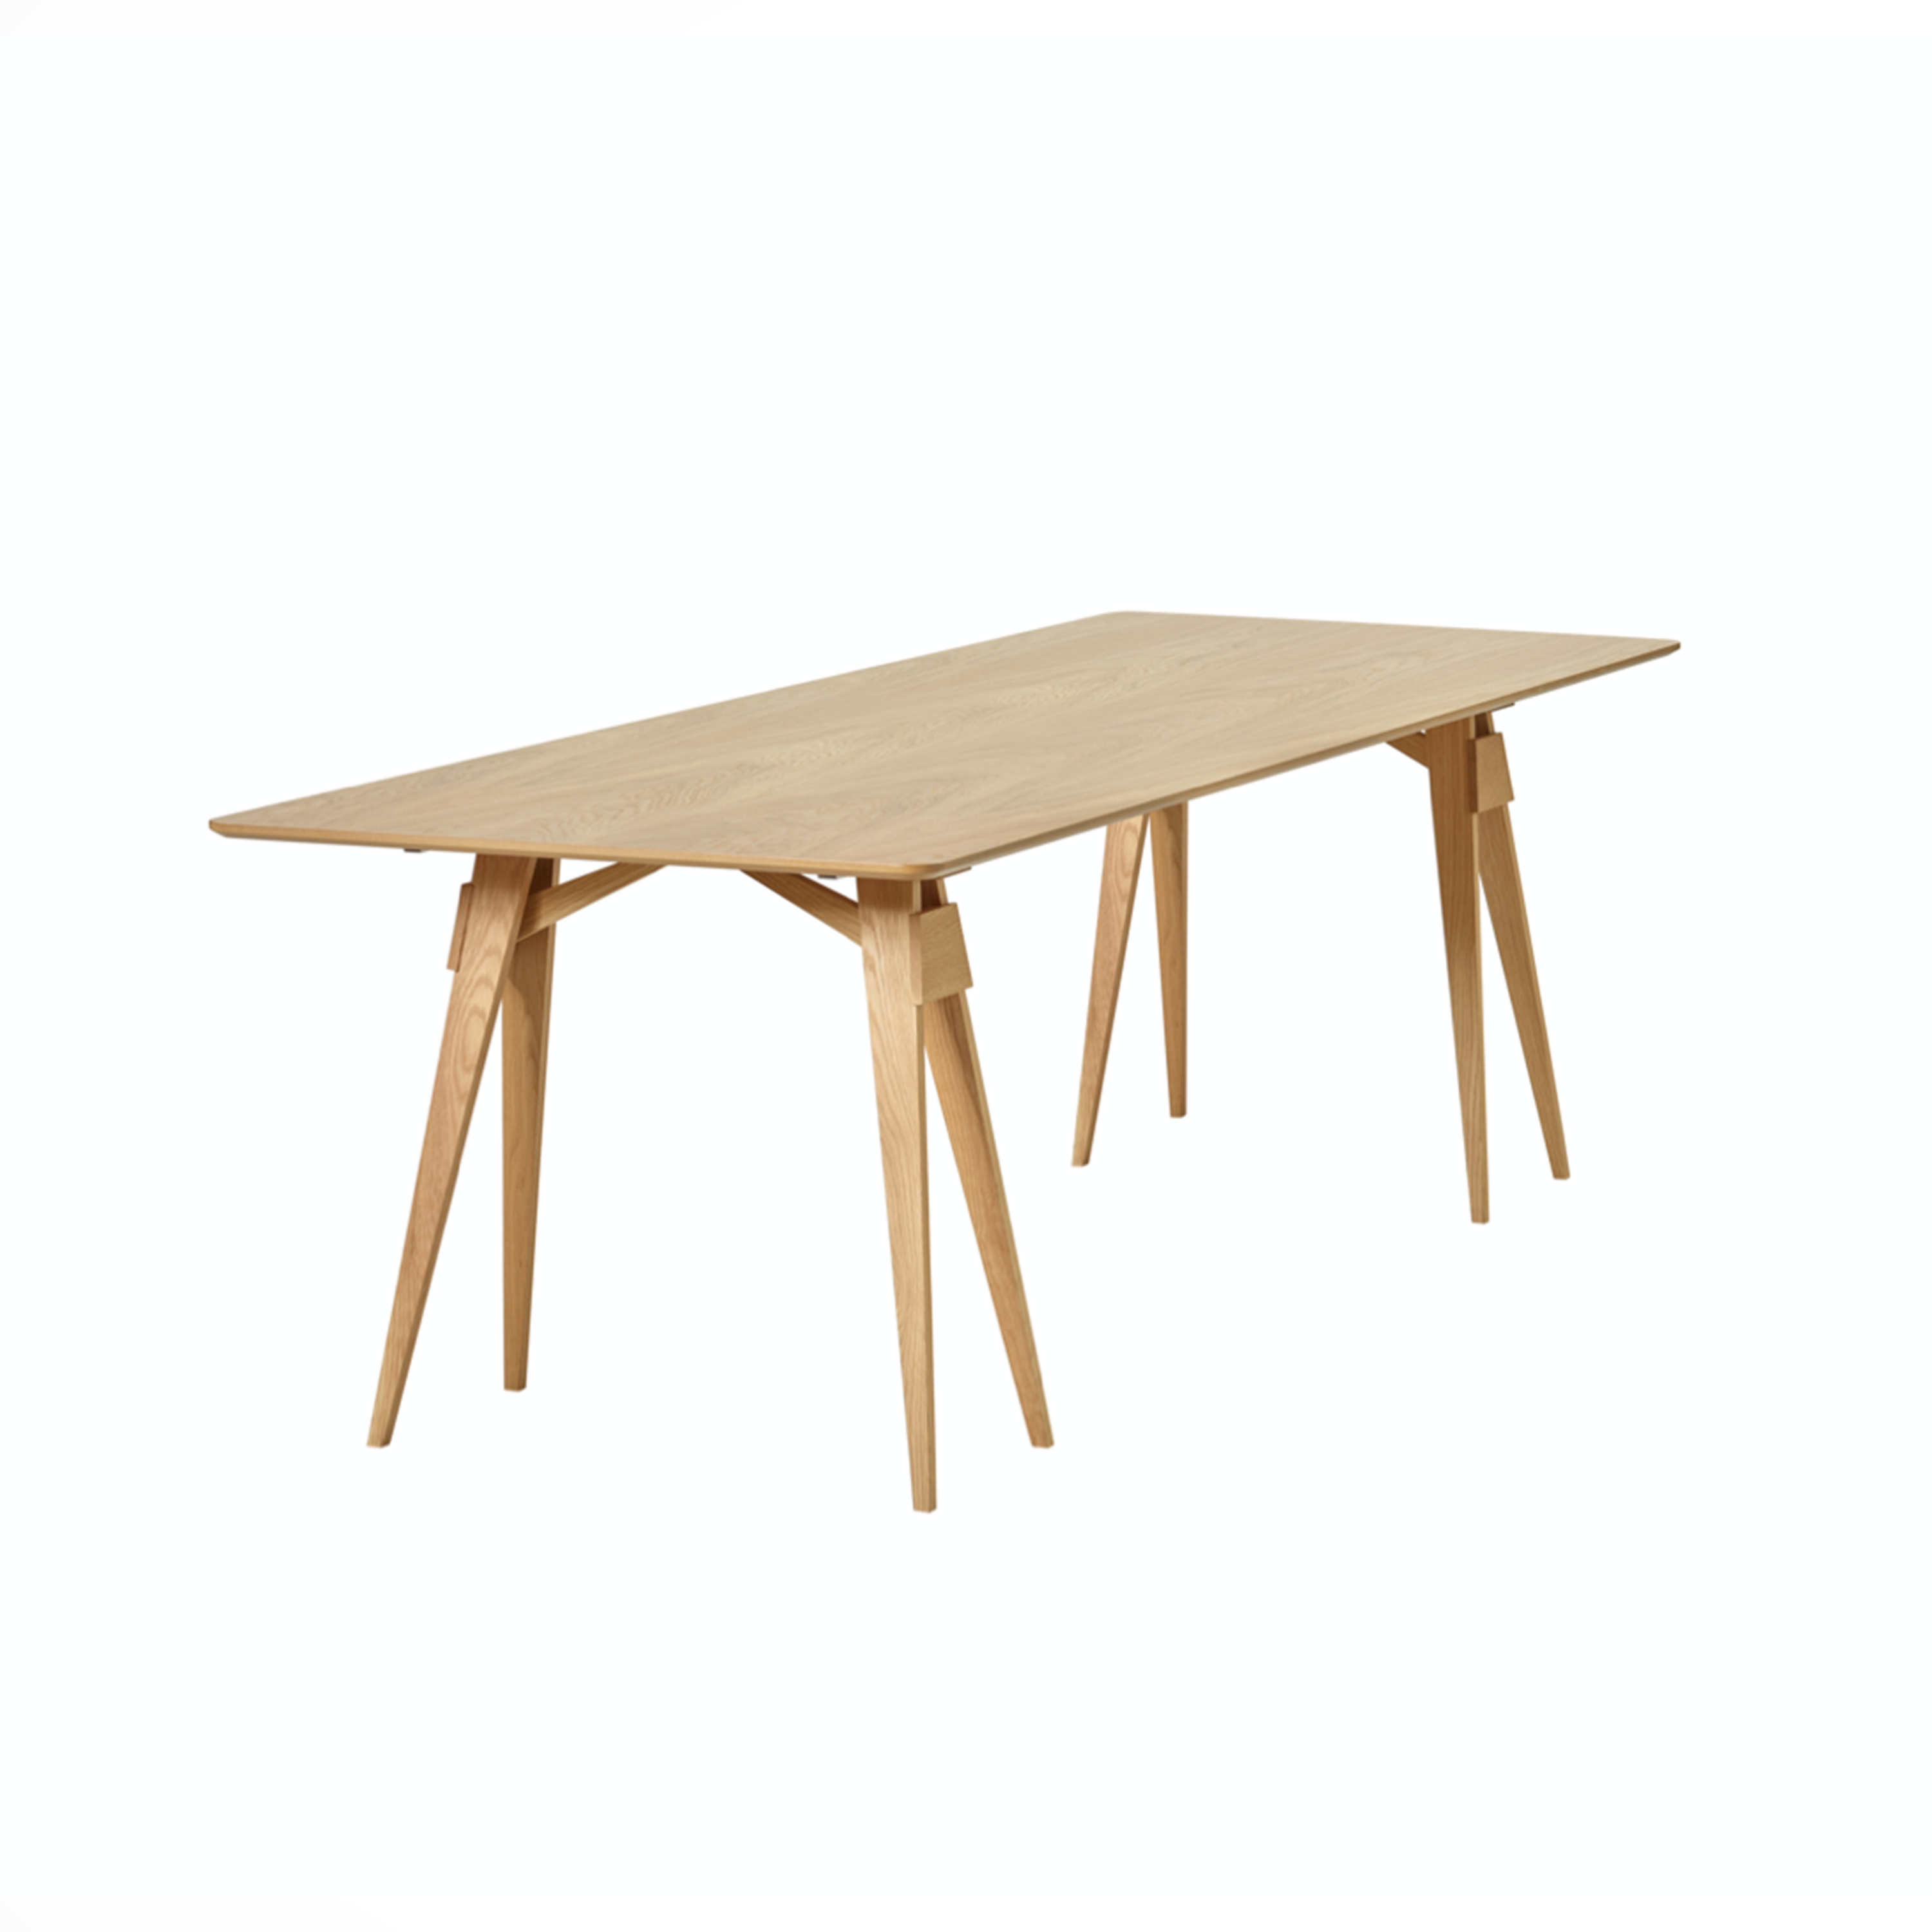 Warehouse Home and Design House Stockholm Arco Table Oak for sale